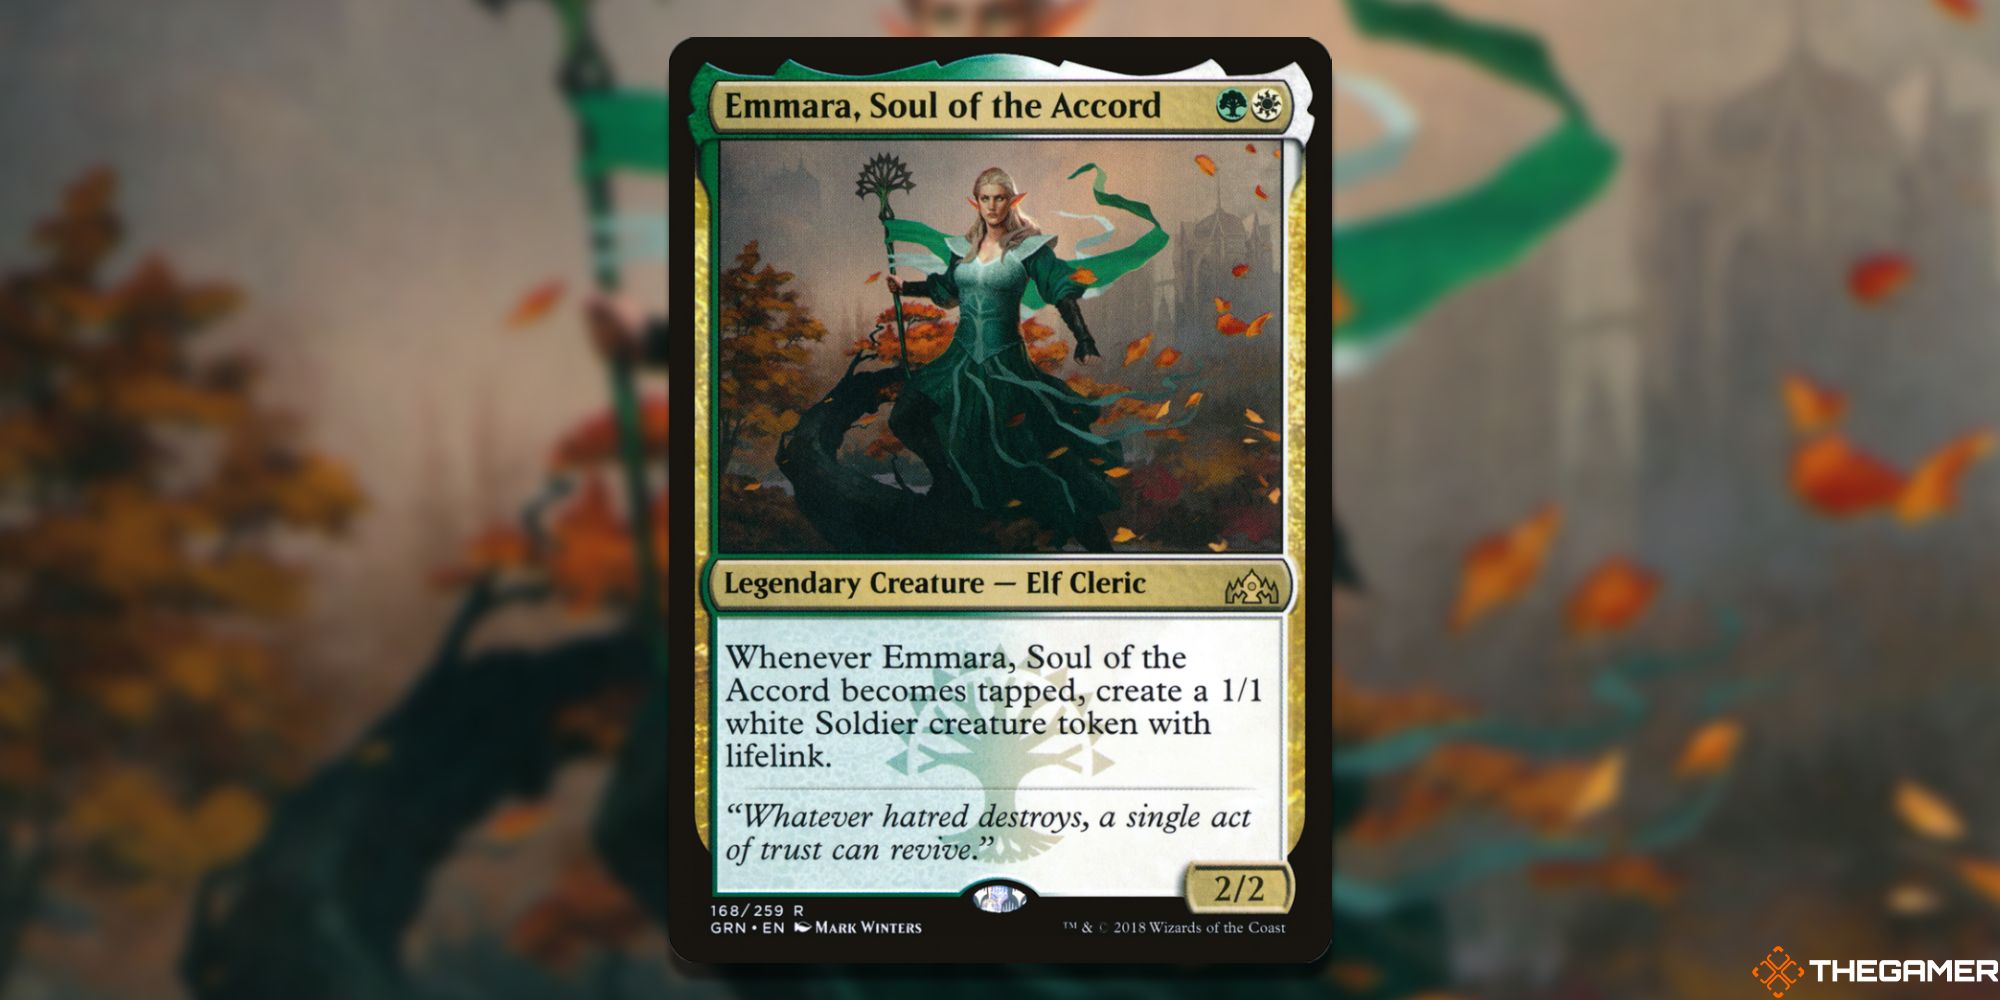 Image of the Emmara Soul of the Accord card in Magic: The Gathering, with art by Mark Winters